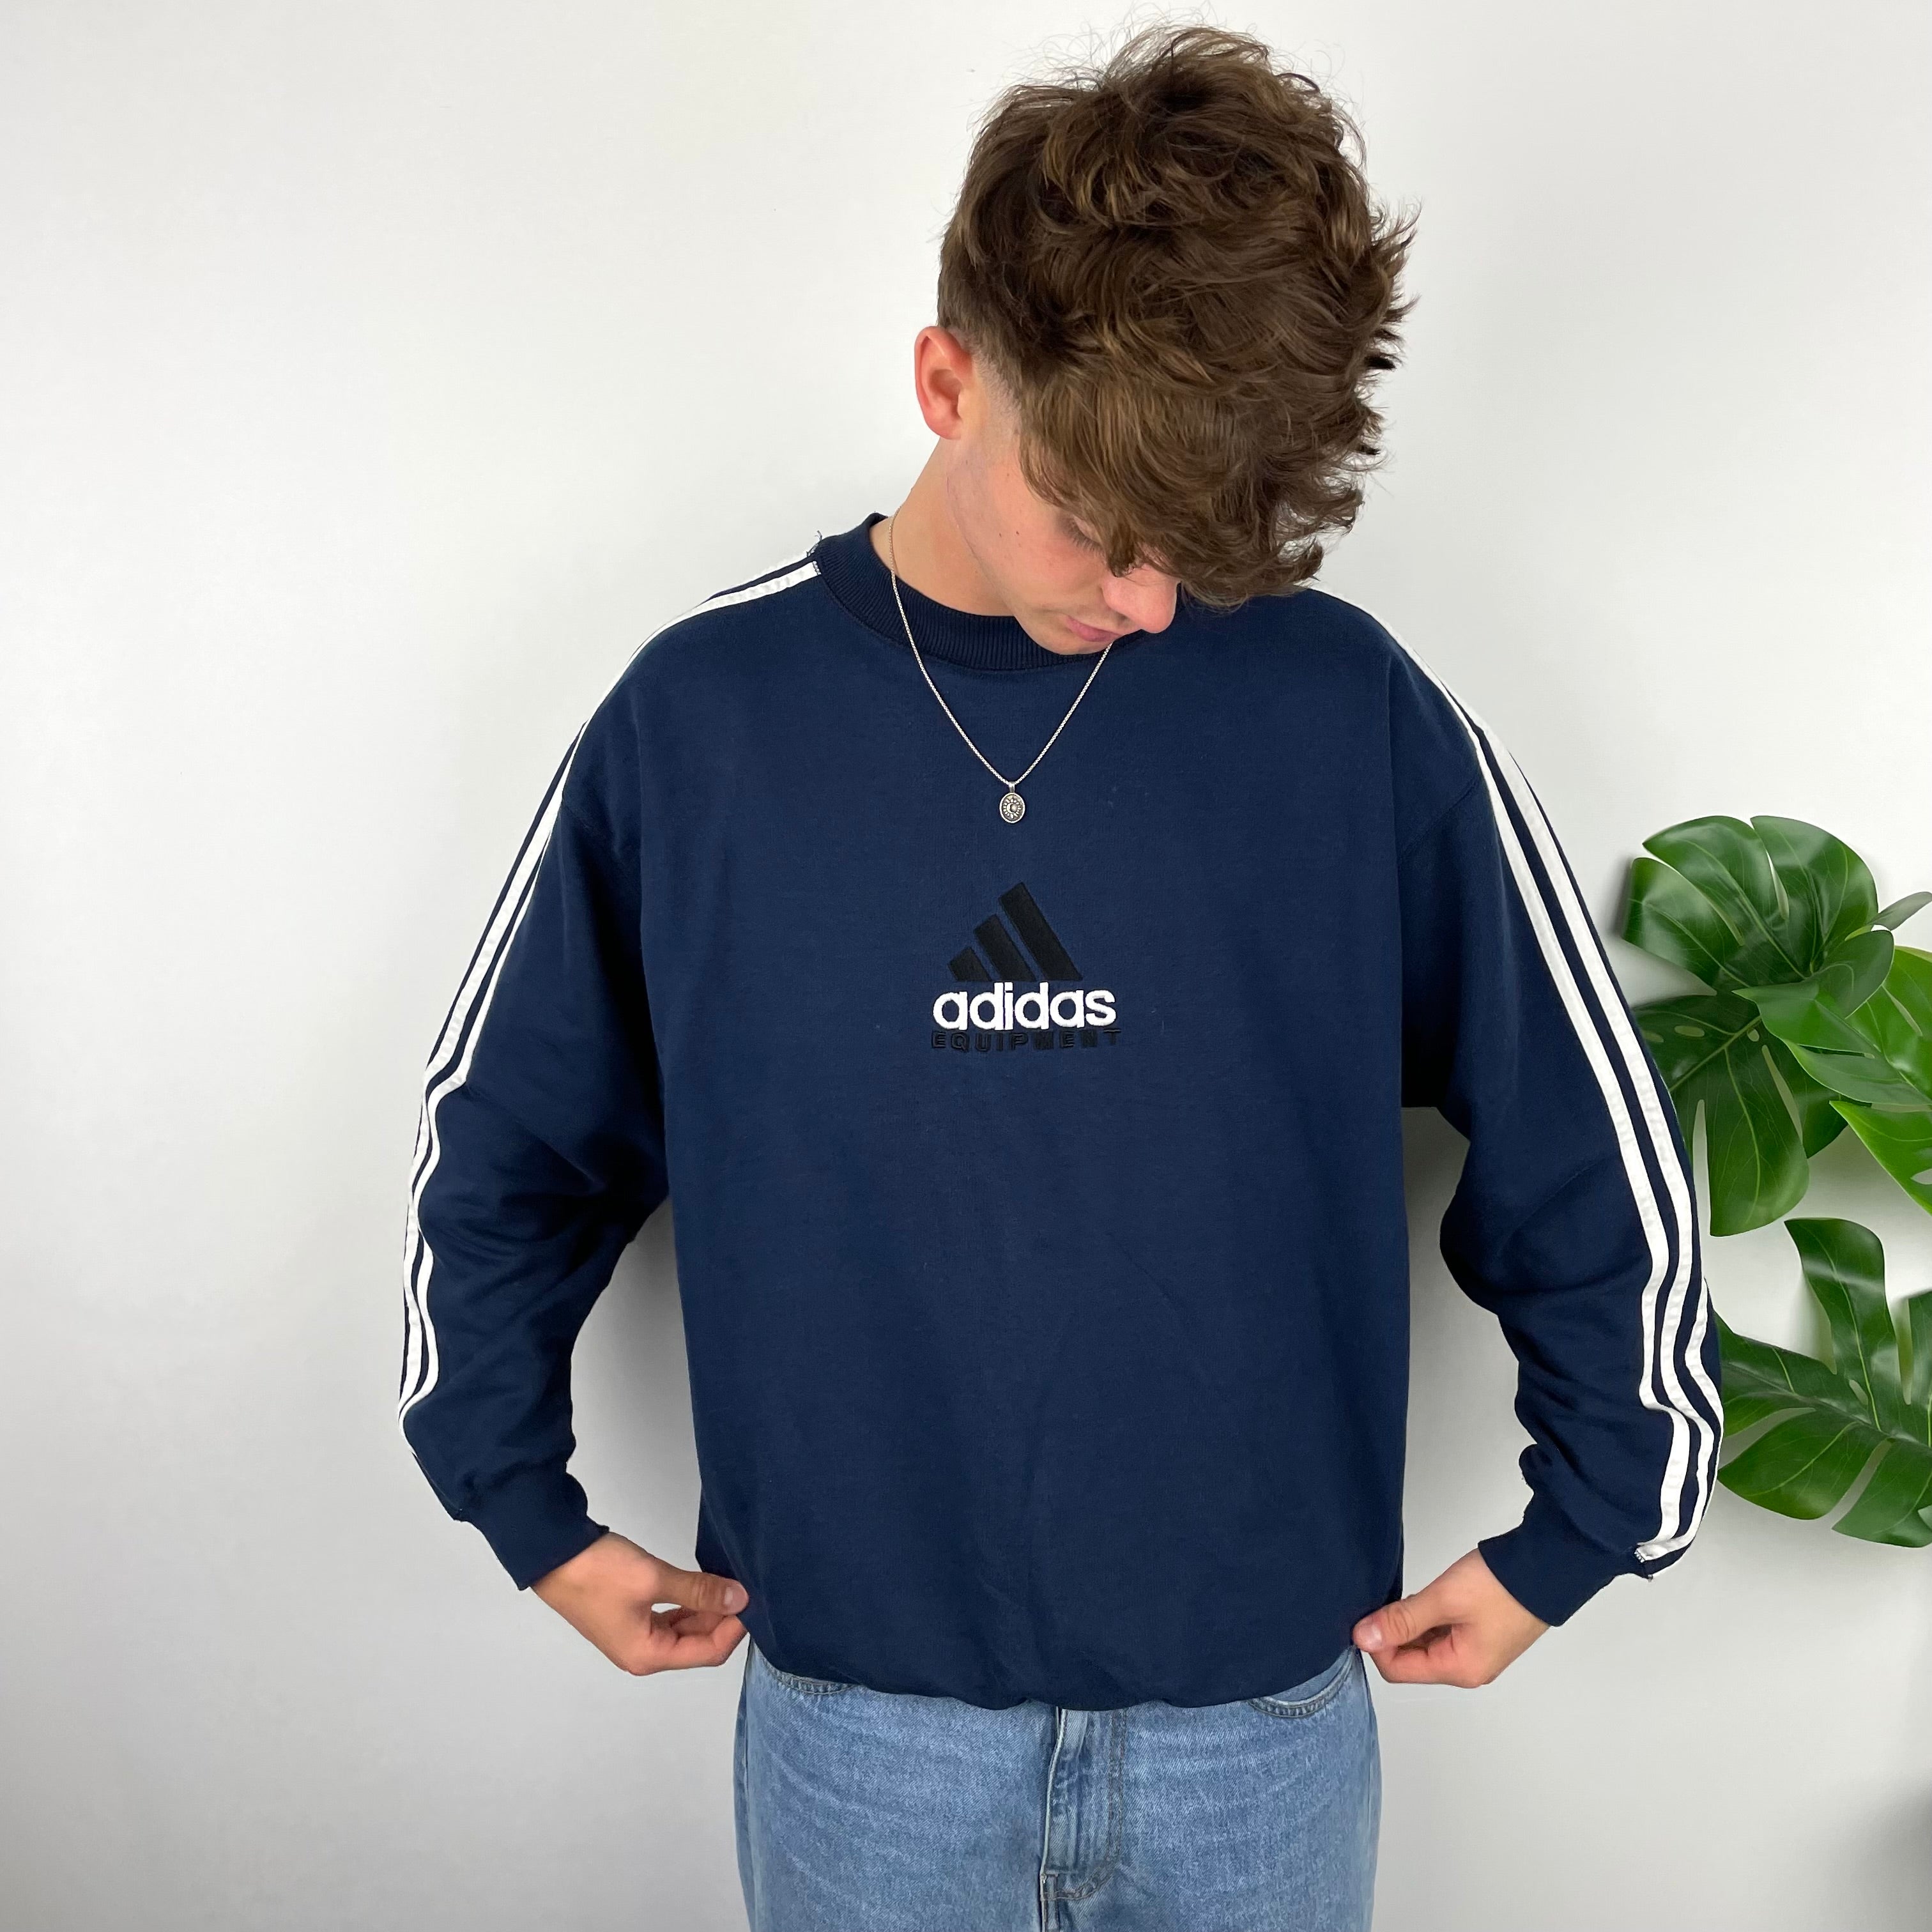 Adidas Equipment RARE Navy Embroidered Spell Out Sweatshirt (XL)